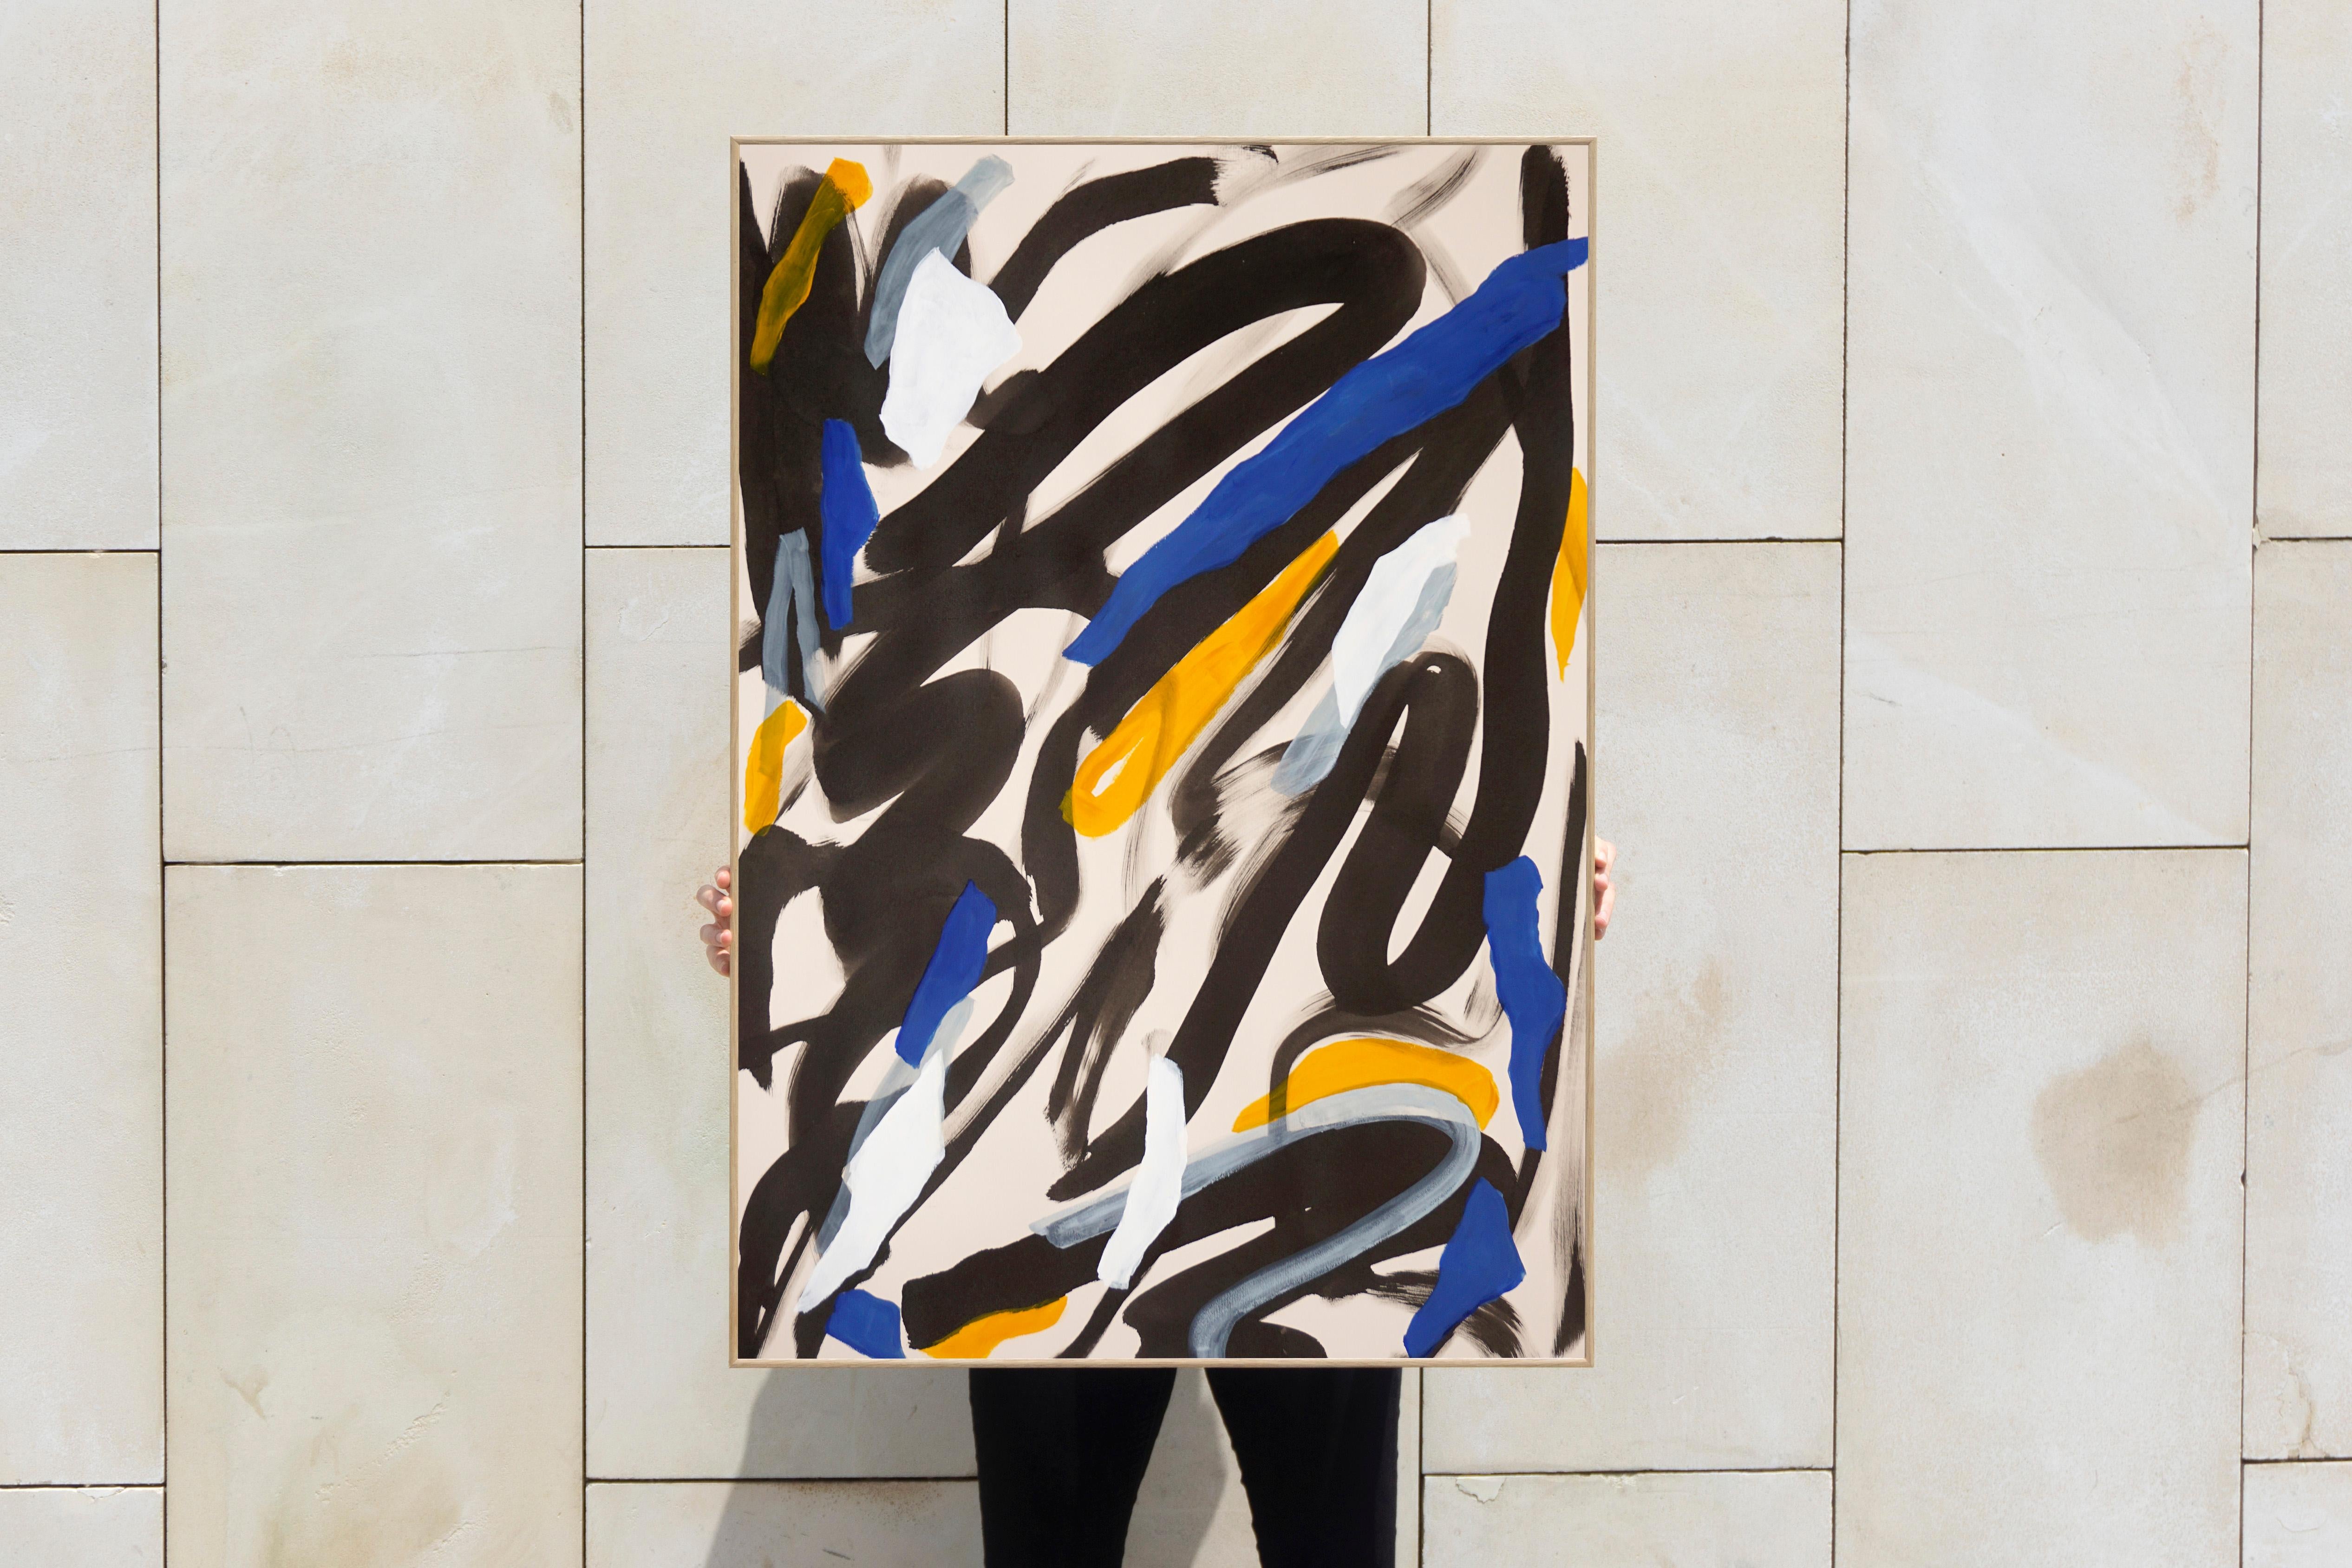 A Windy Day, Vigorous Gestures in Blue, Yellow and Black, Abstract Brushstrokes  - Painting by Romina Milano